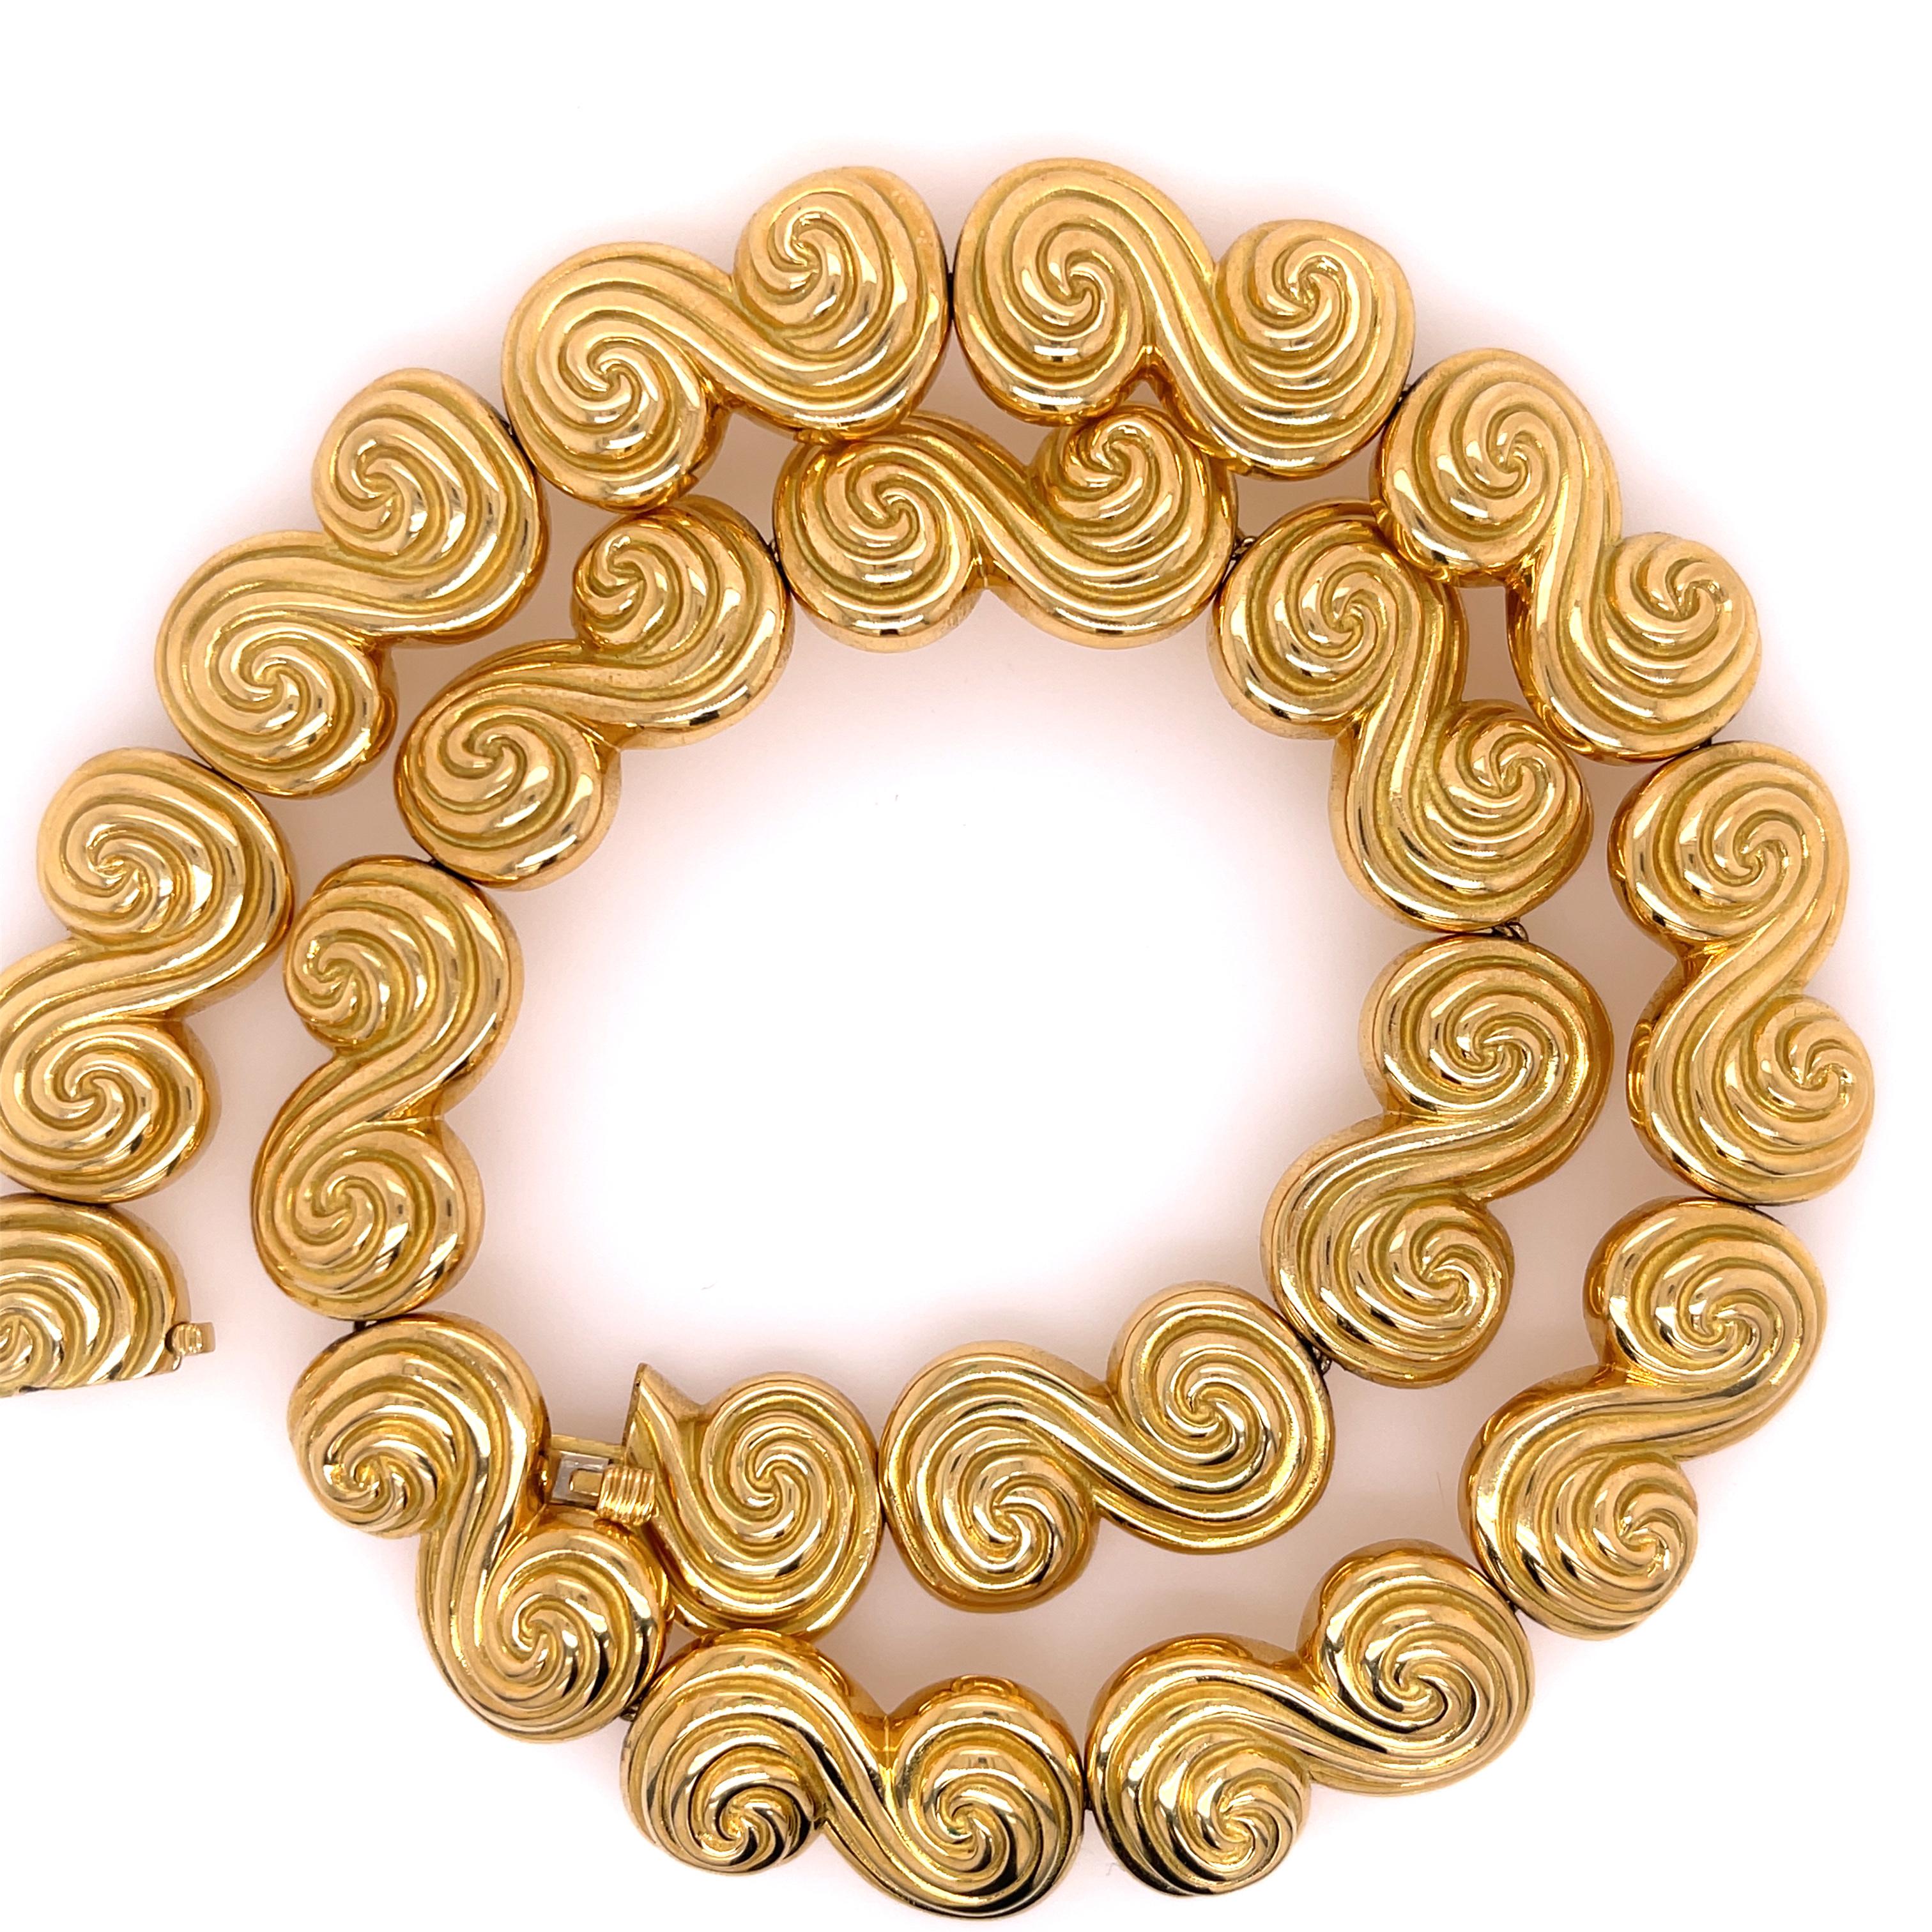 Tiffany & Co. spiral swirl necklace in 18K yellow gold. Stamped 1990 750 Tiffany & Co.